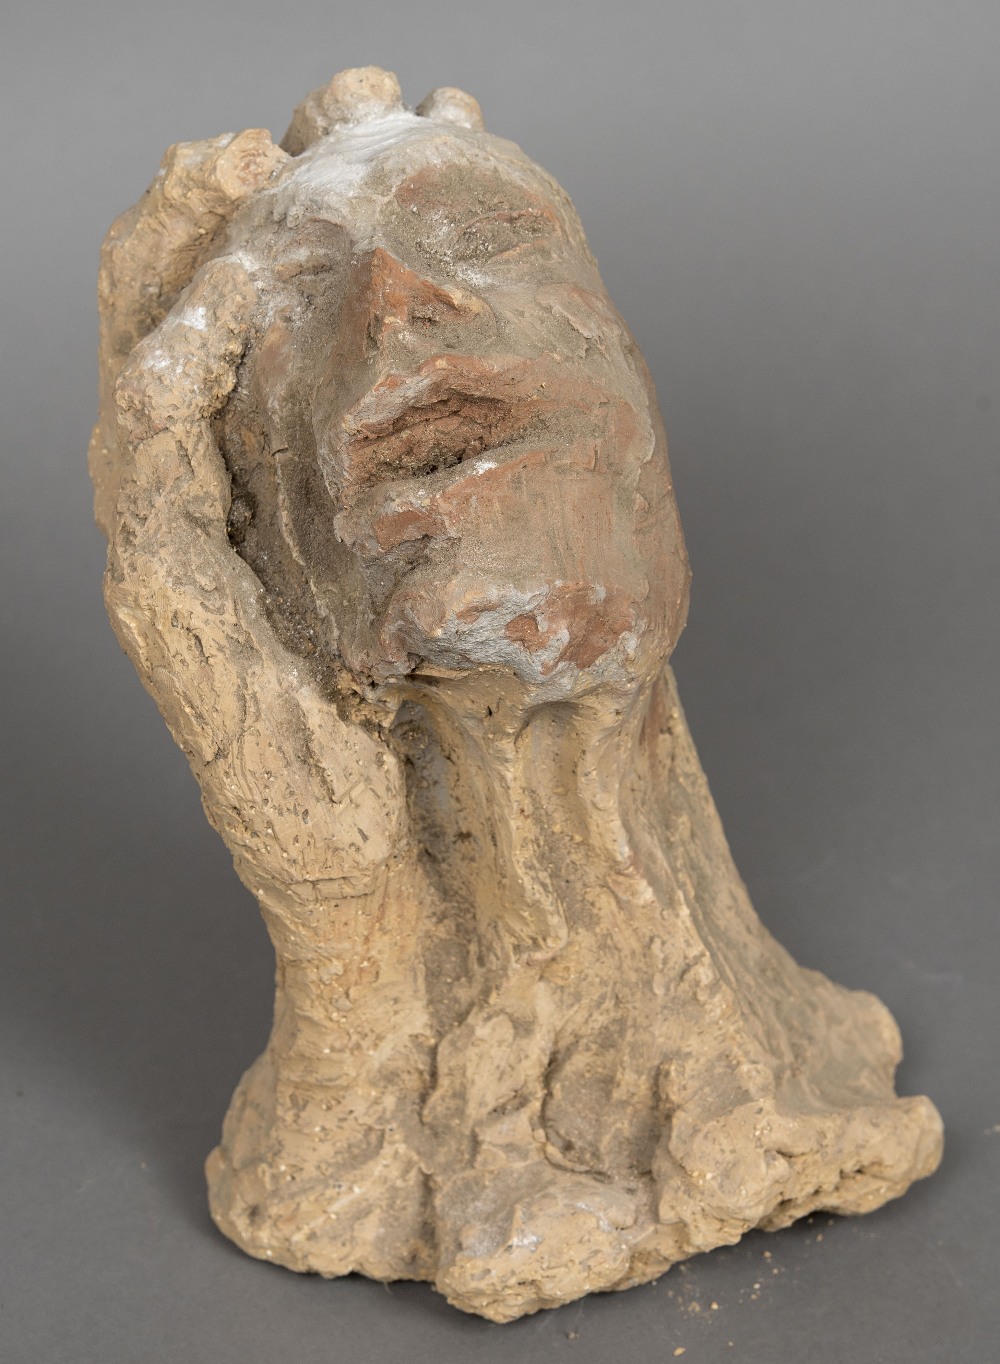 GERARD DUREAUX (1940-2014) French Head Study Clay maquette 28 cm high CONDITION REPORTS: